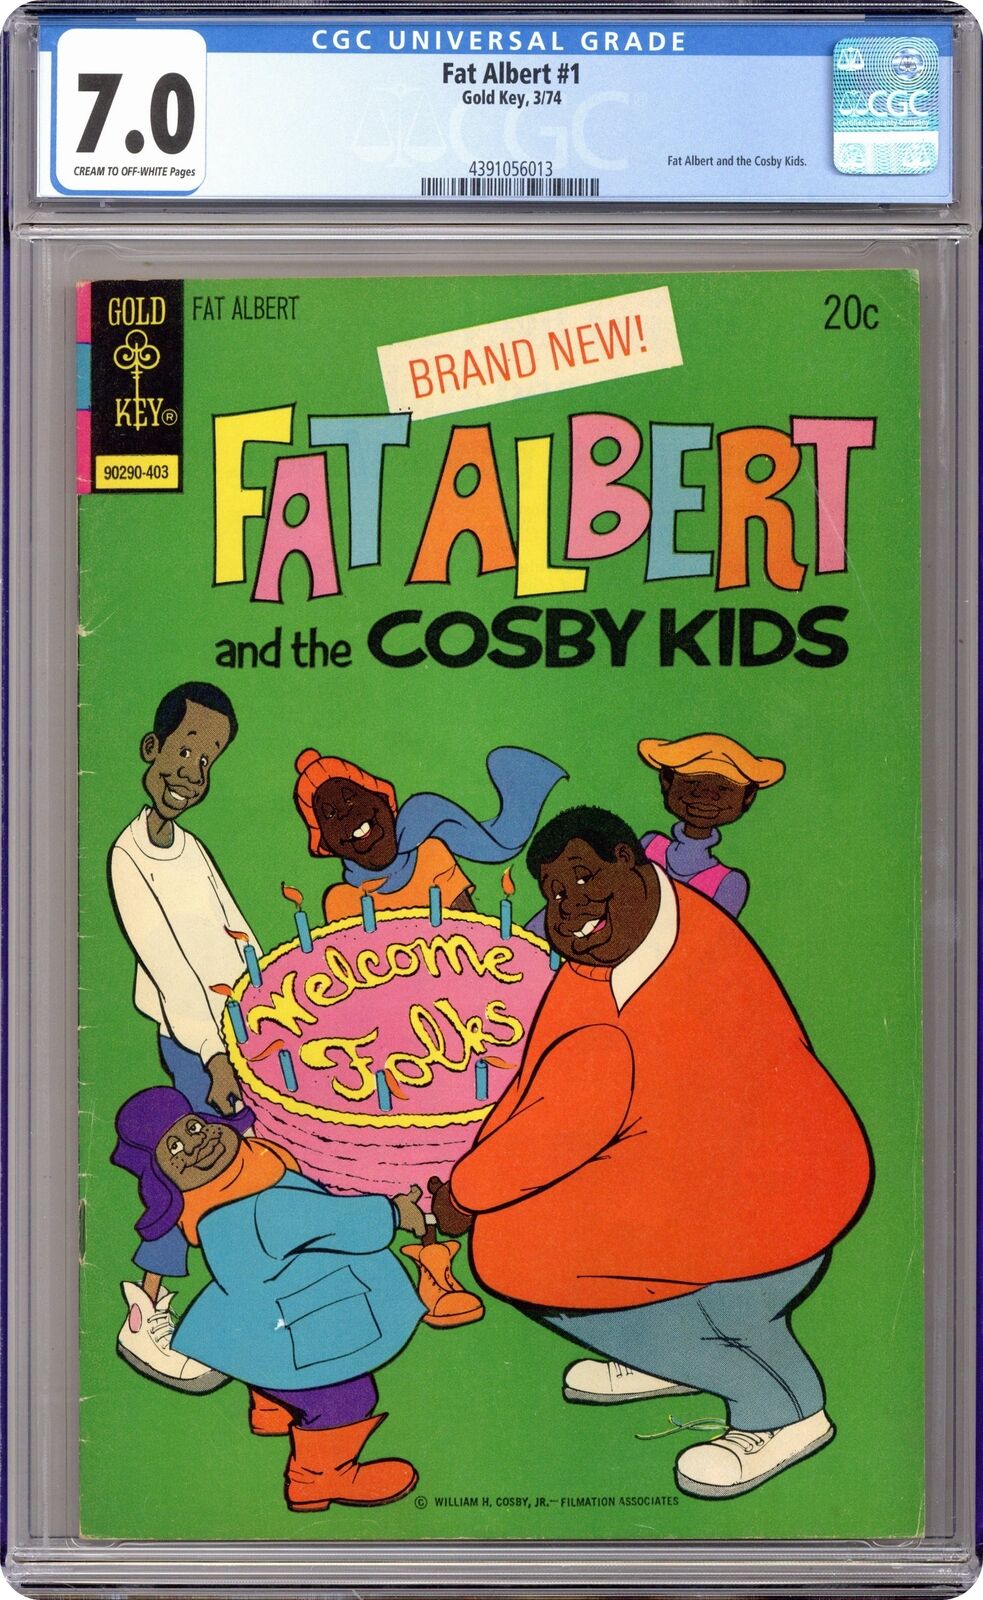 Fat Albert and the Cosby Kids #1 CGC 7.0 1974 Gold Key 4391056013